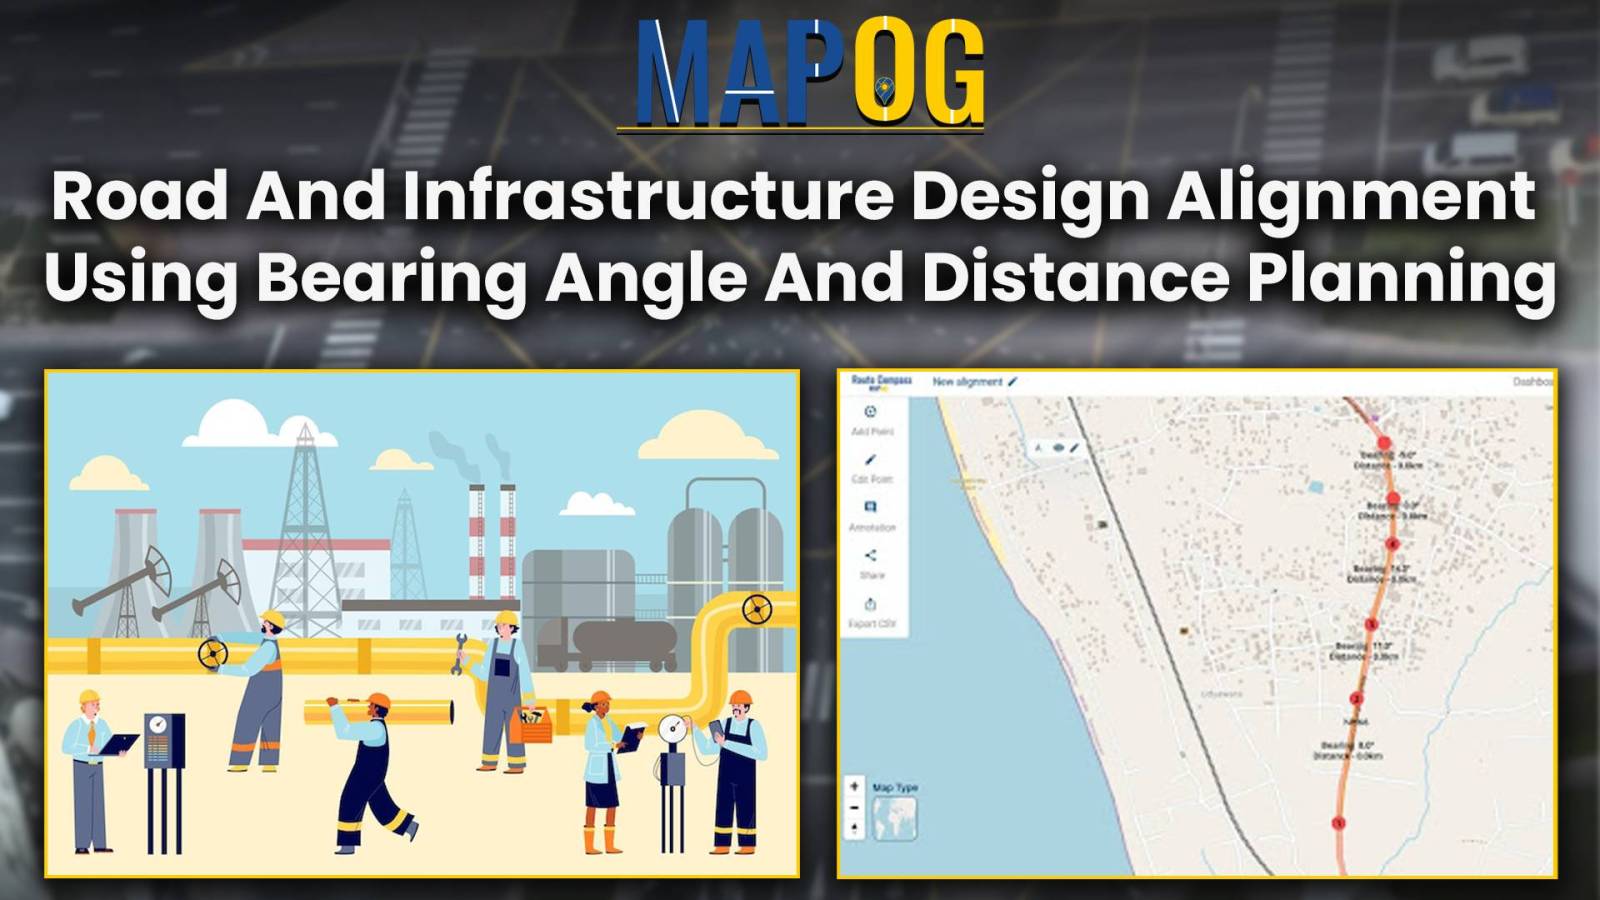 Road and Infrastructure Design and Alignment using Bearing Angle and Distance Planning